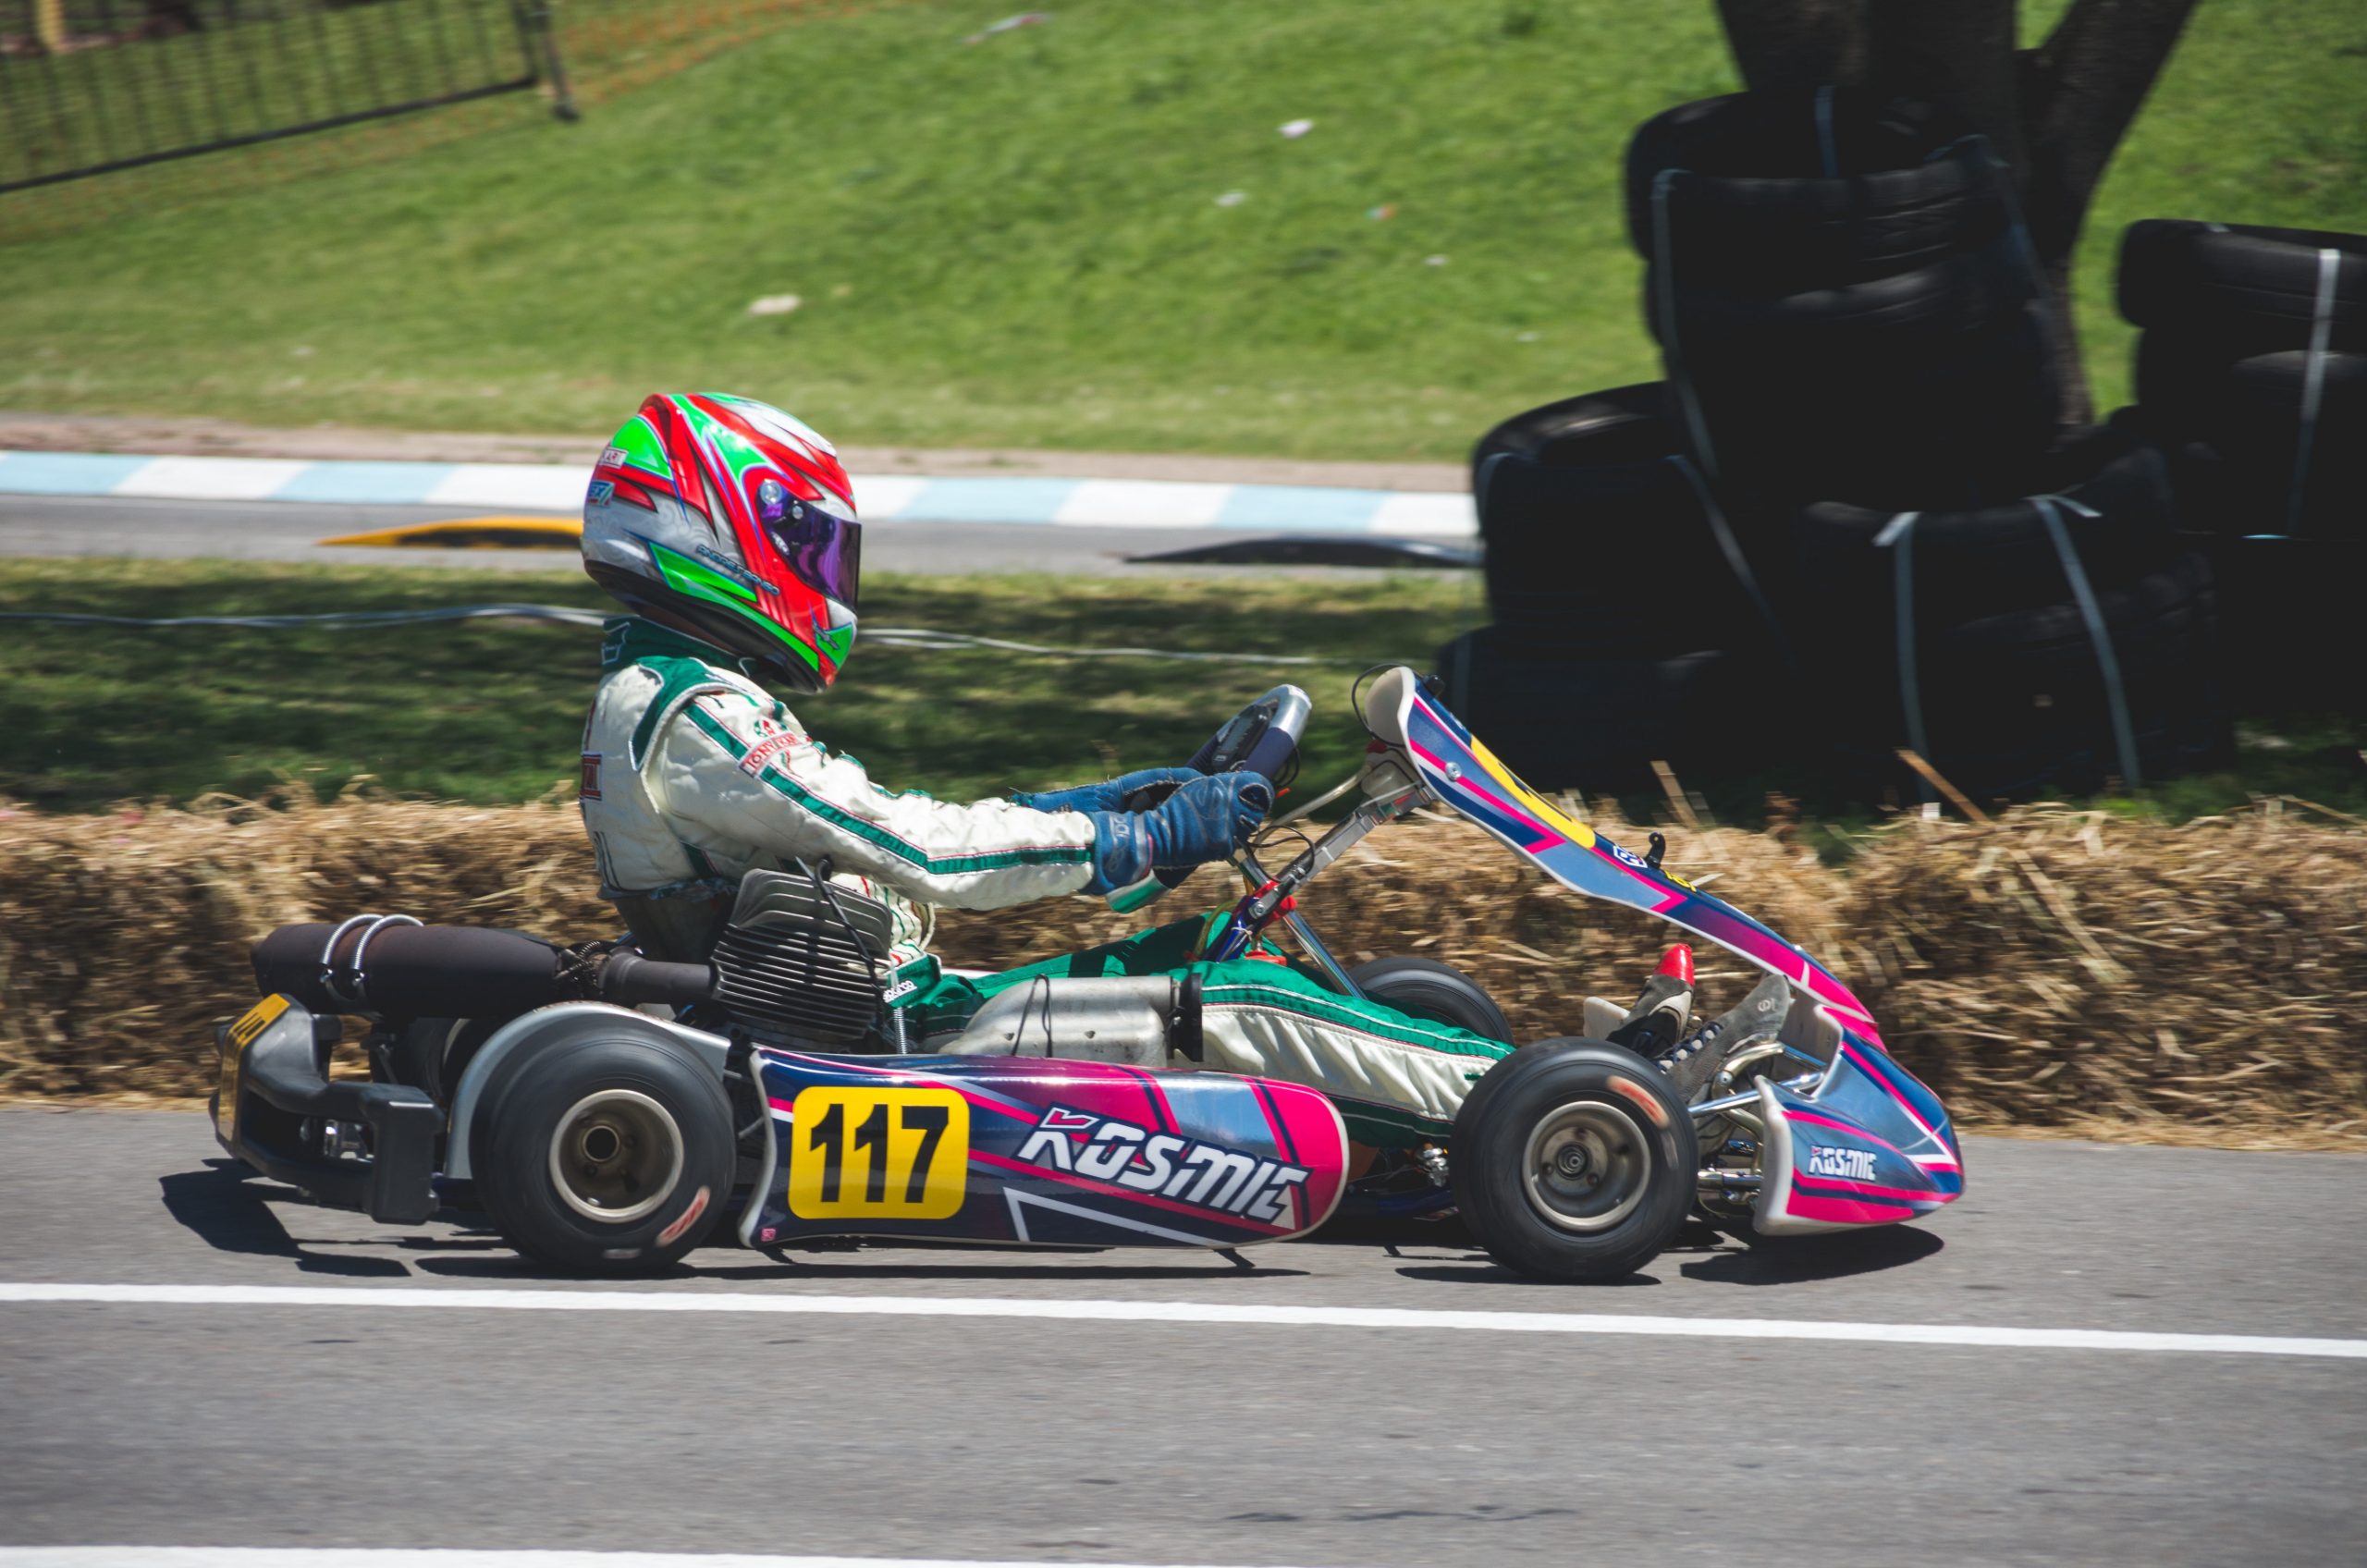 How to buy a good go-kart? See our tips